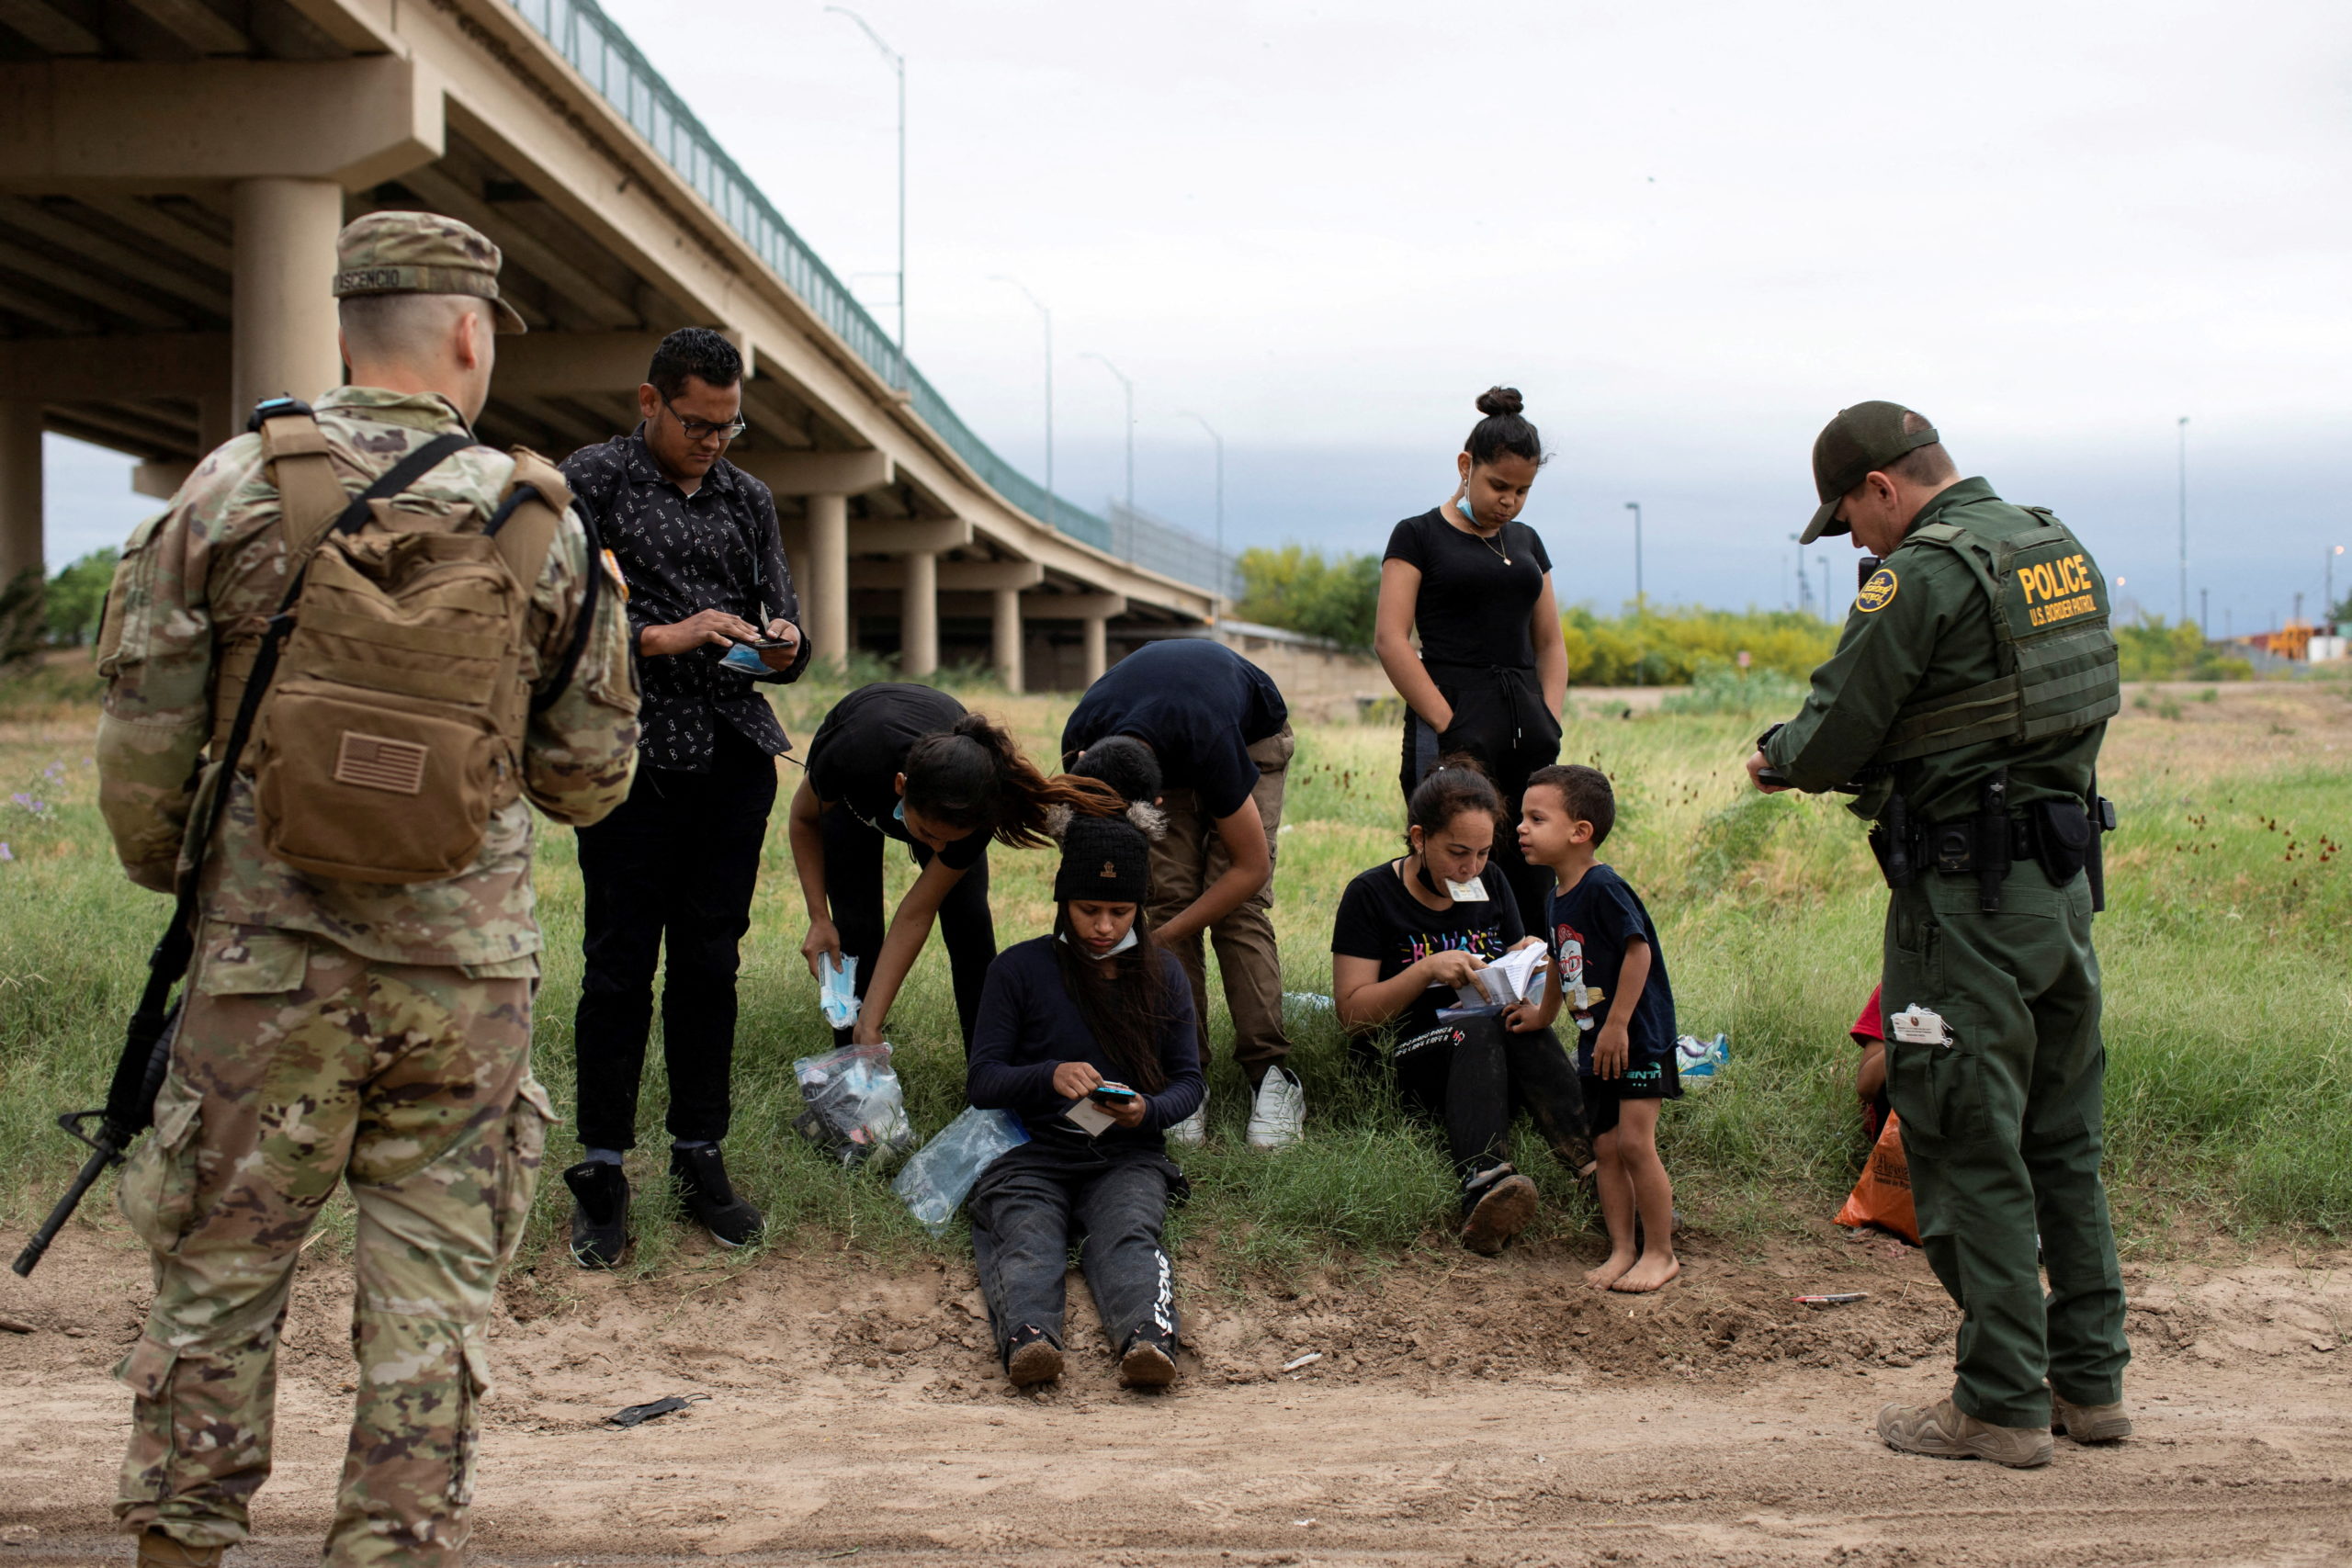 A Customs and Border Protection agent collects biographical information from a group of Venezuelan migrants before taking them into custody near the southern border town of Eagle Pass, Texas, U.S. April 25, 2022. Picture taken April 25, 2022. REUTERS/Kaylee Greenlee Beal TPX IMAGES OF THE DAY